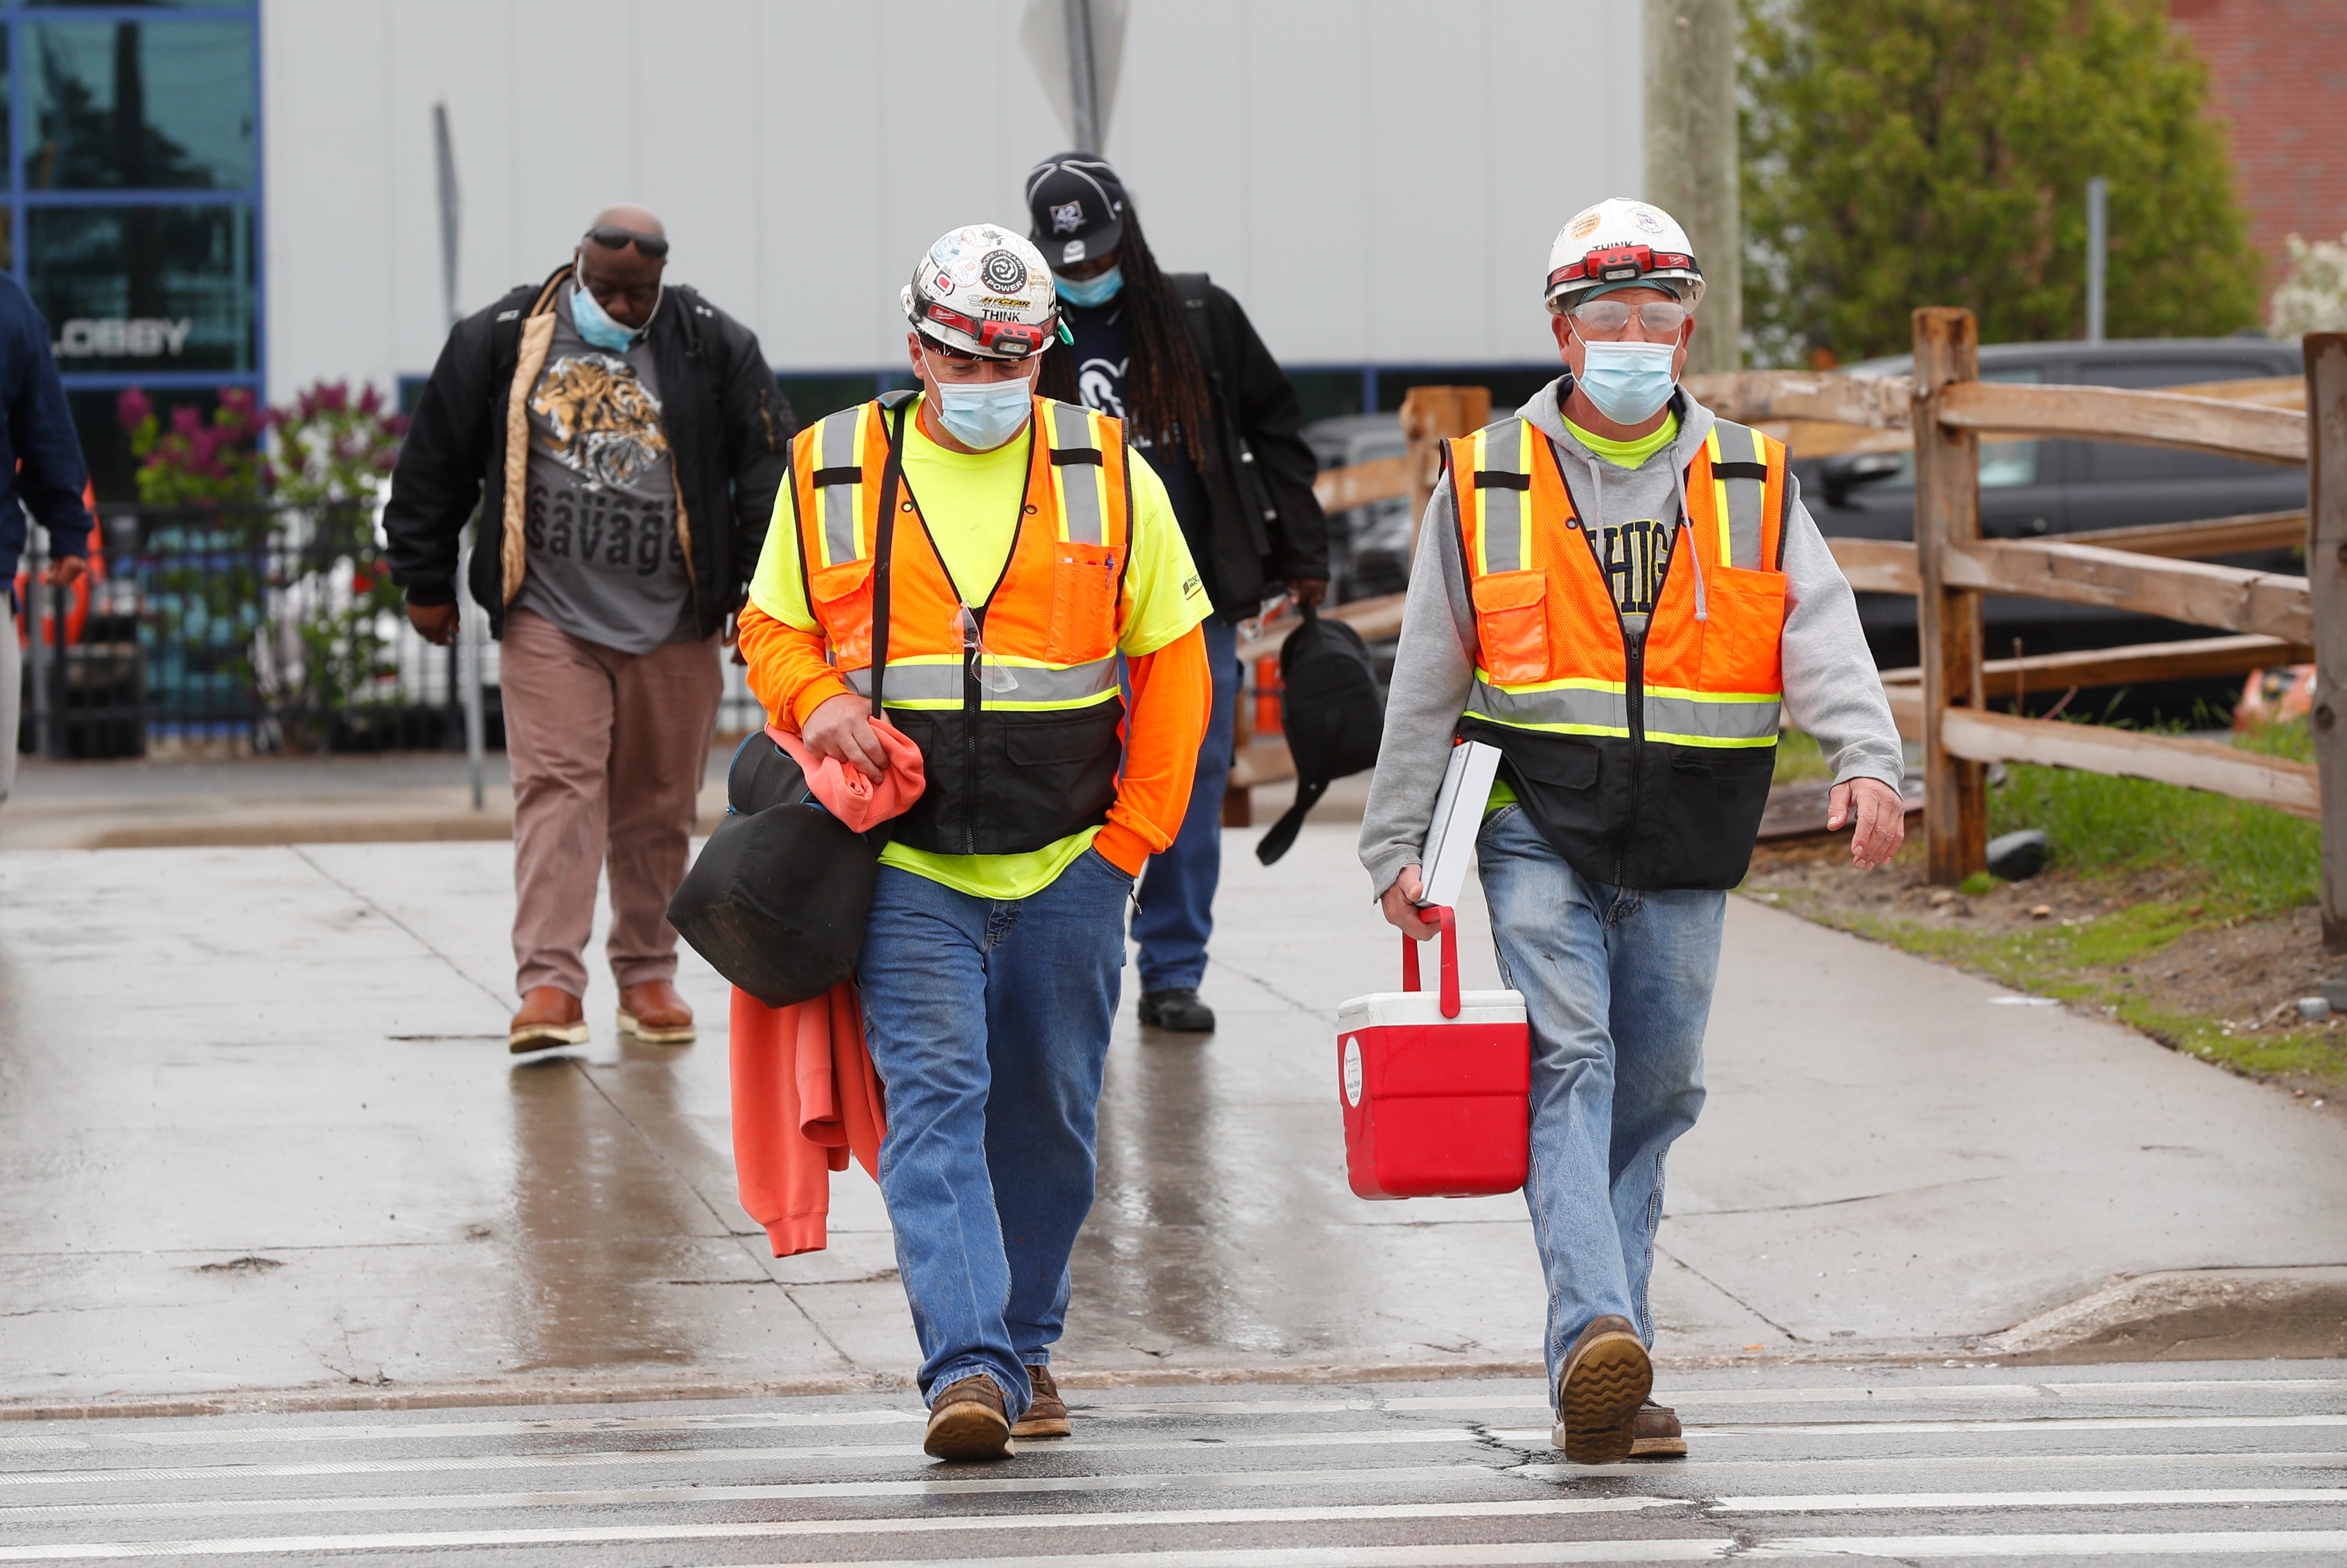 United Auto Workers members leave the Fiat Chrysler Automobiles Warren Truck Plant after the first work shift, Monday, May 18, 2020, in Warren, Mich. Fiat Chrysler Automobiles NV along with rivals Ford and General Motors Co., restarted the assembly lines on Monday after several week of inactivity due to the corona virus pandemic.